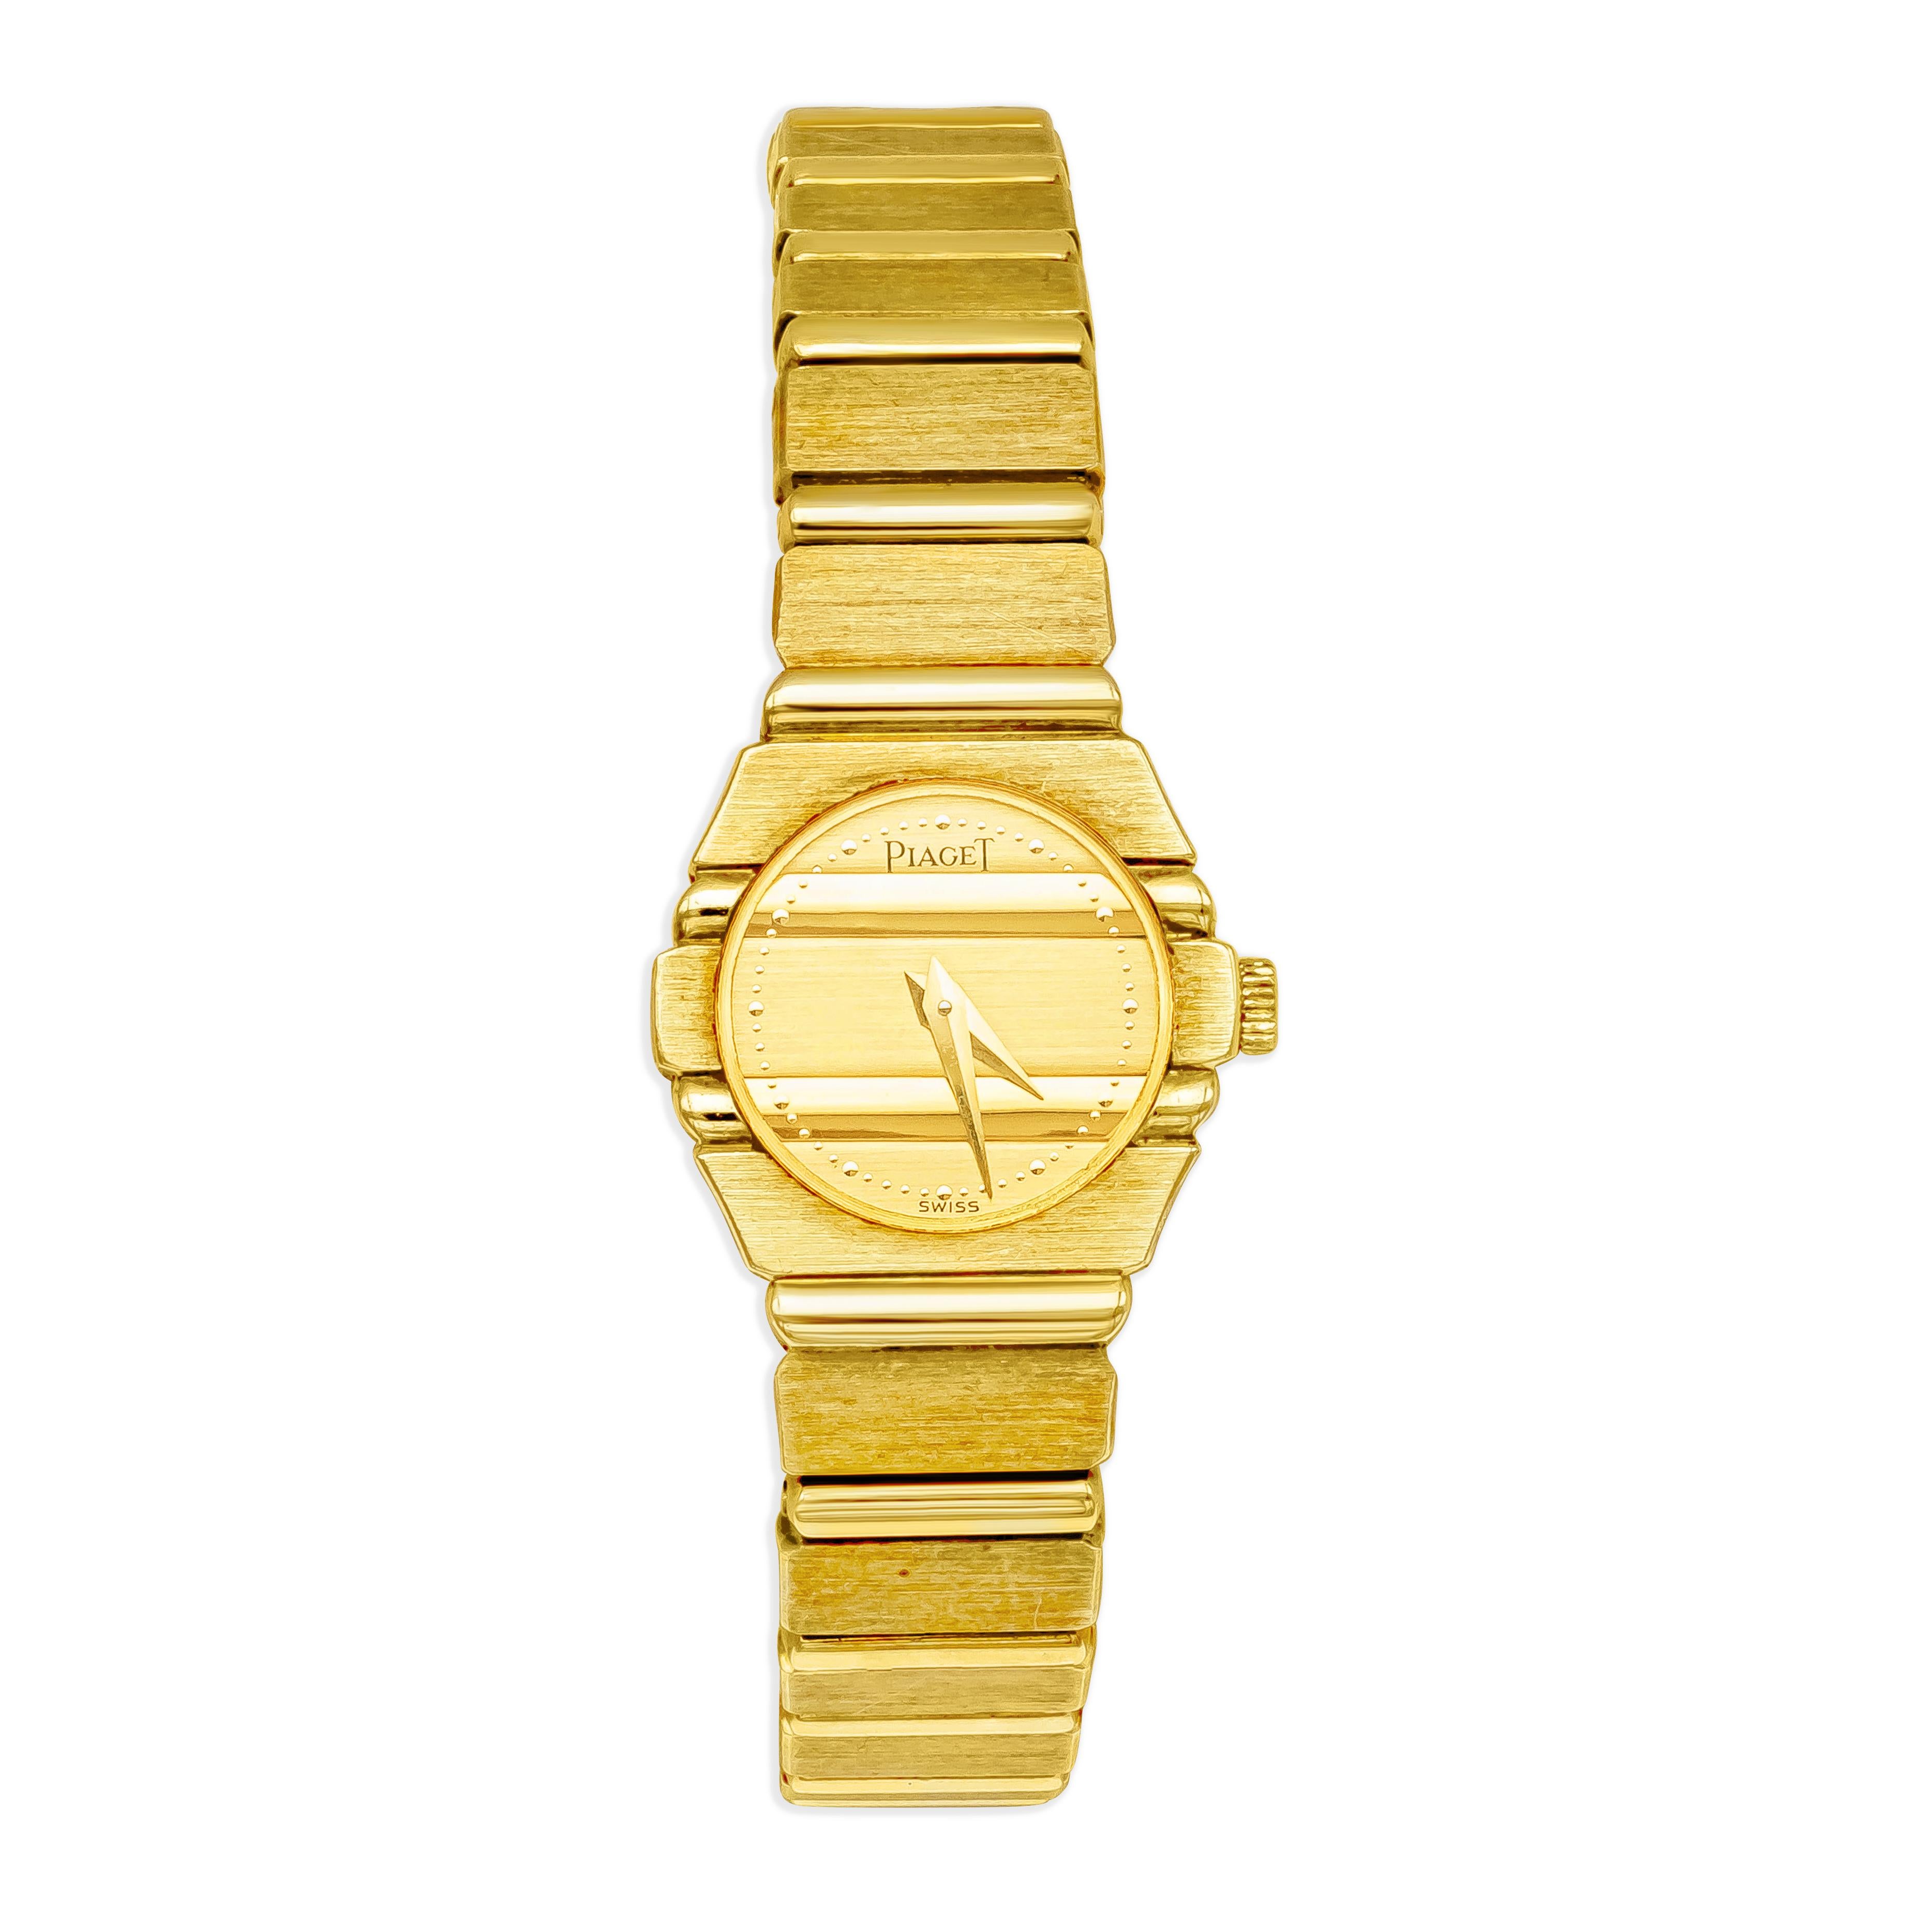 Classic and elegant ladies Piaget Polo small watch in 18k yellow gold. Quartz. Ref 841 C701. Fine Pre-owned Piaget Watch.

Certified preowned Piaget Polo 841 C701 watch is made out of yellow gold on a Gold Link band with a 18k tang buckle. This